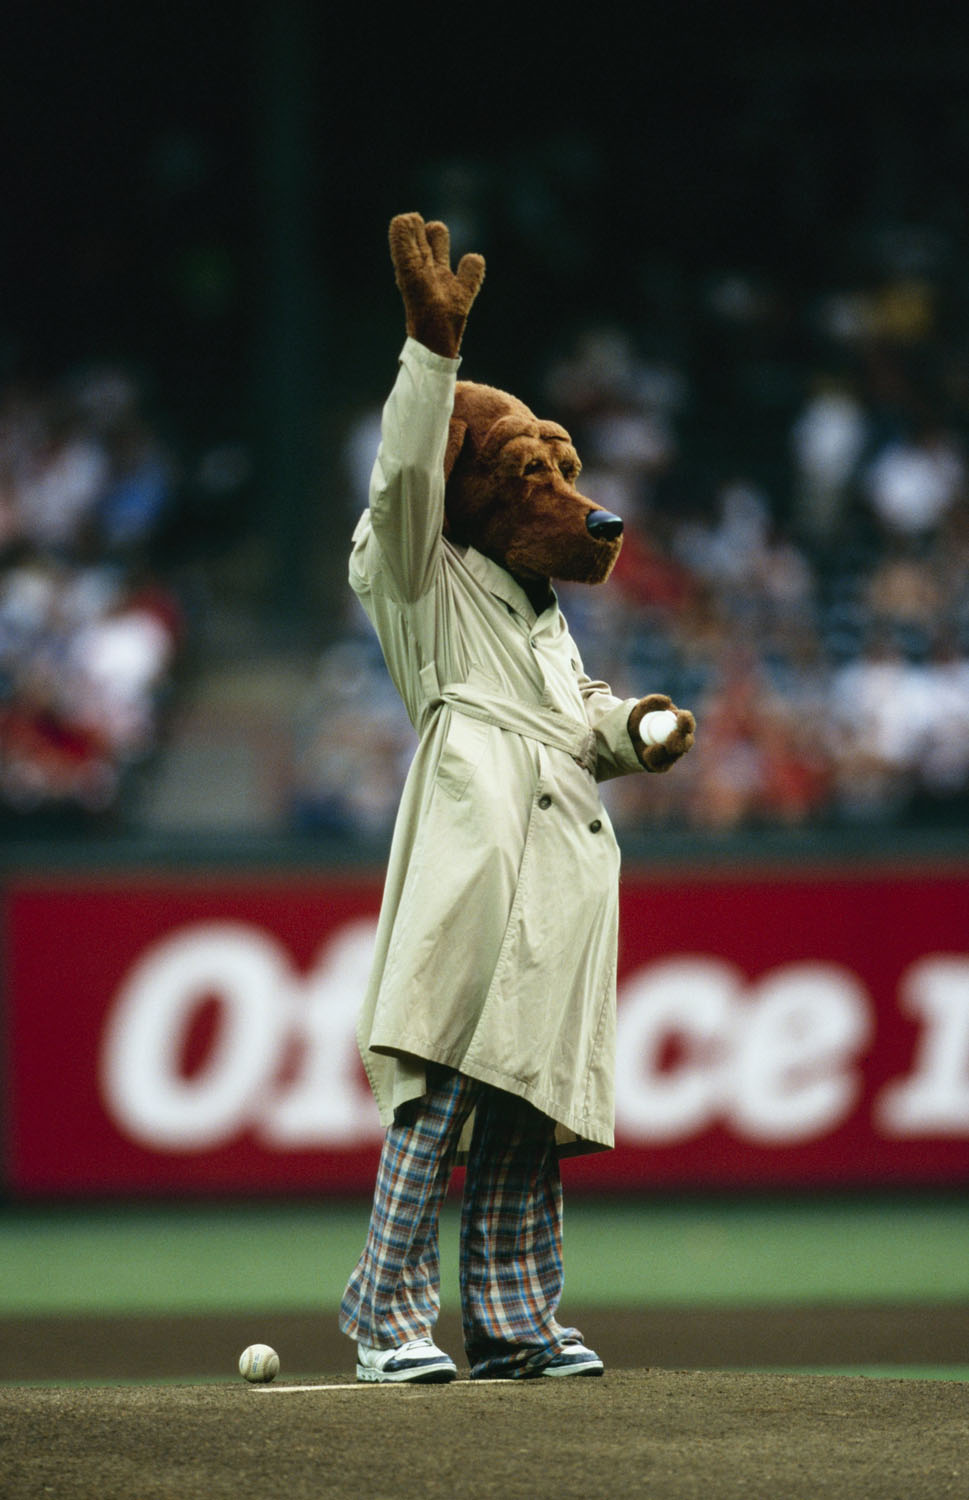 McGruff the Crime Dog throws out the first pitch before the Toronto Blue Jays game against the Texas Rangers at The Ballpark in Arlington on August 4, 1998 in Arlington, Texas. (Stephen Dunn—Getty Images)